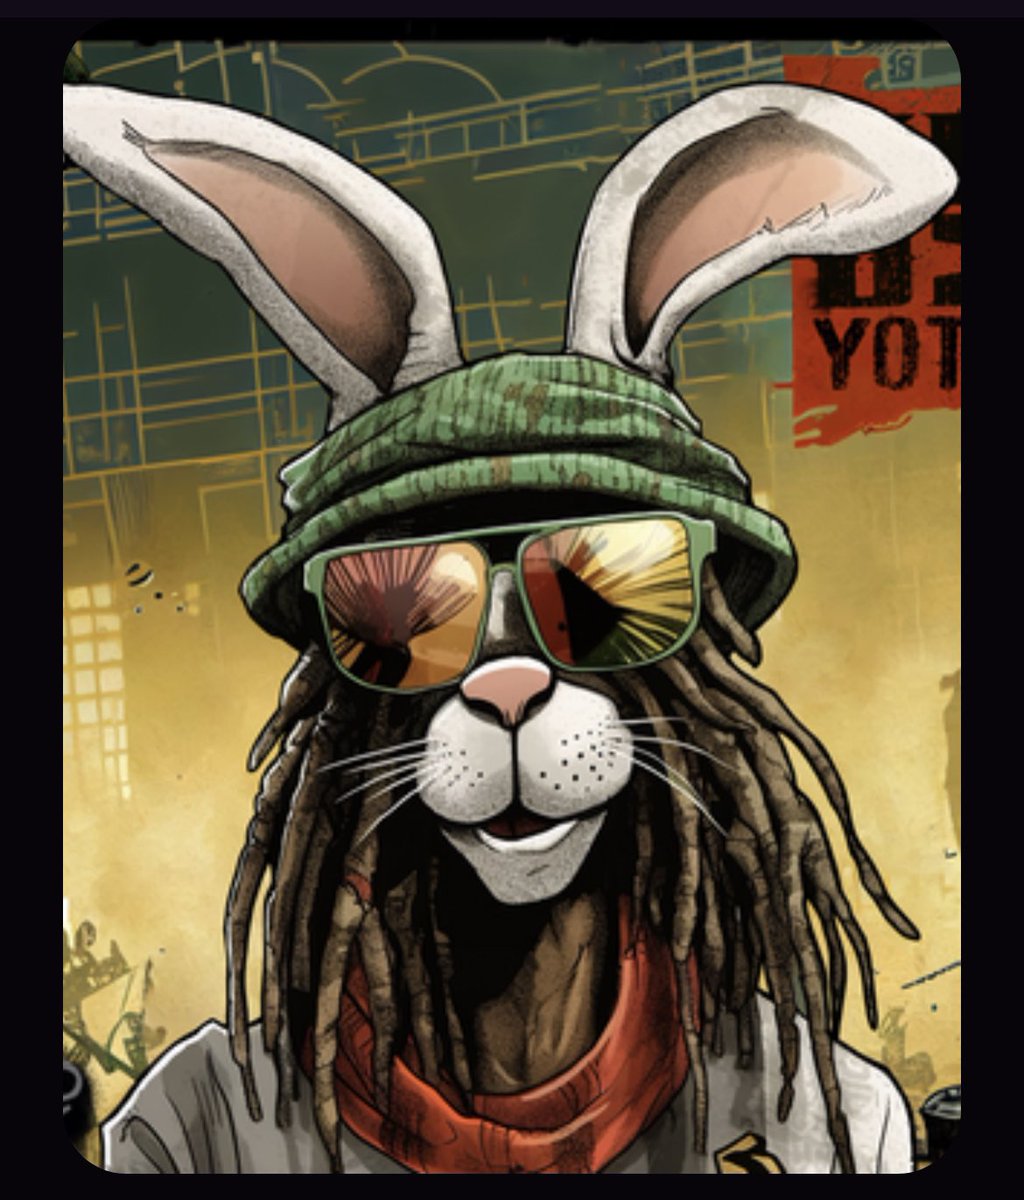 I am all in on this Project @knucklebunnyds with the most incredible ART for the YOTR Year of the Rabbit Mint #YOTR